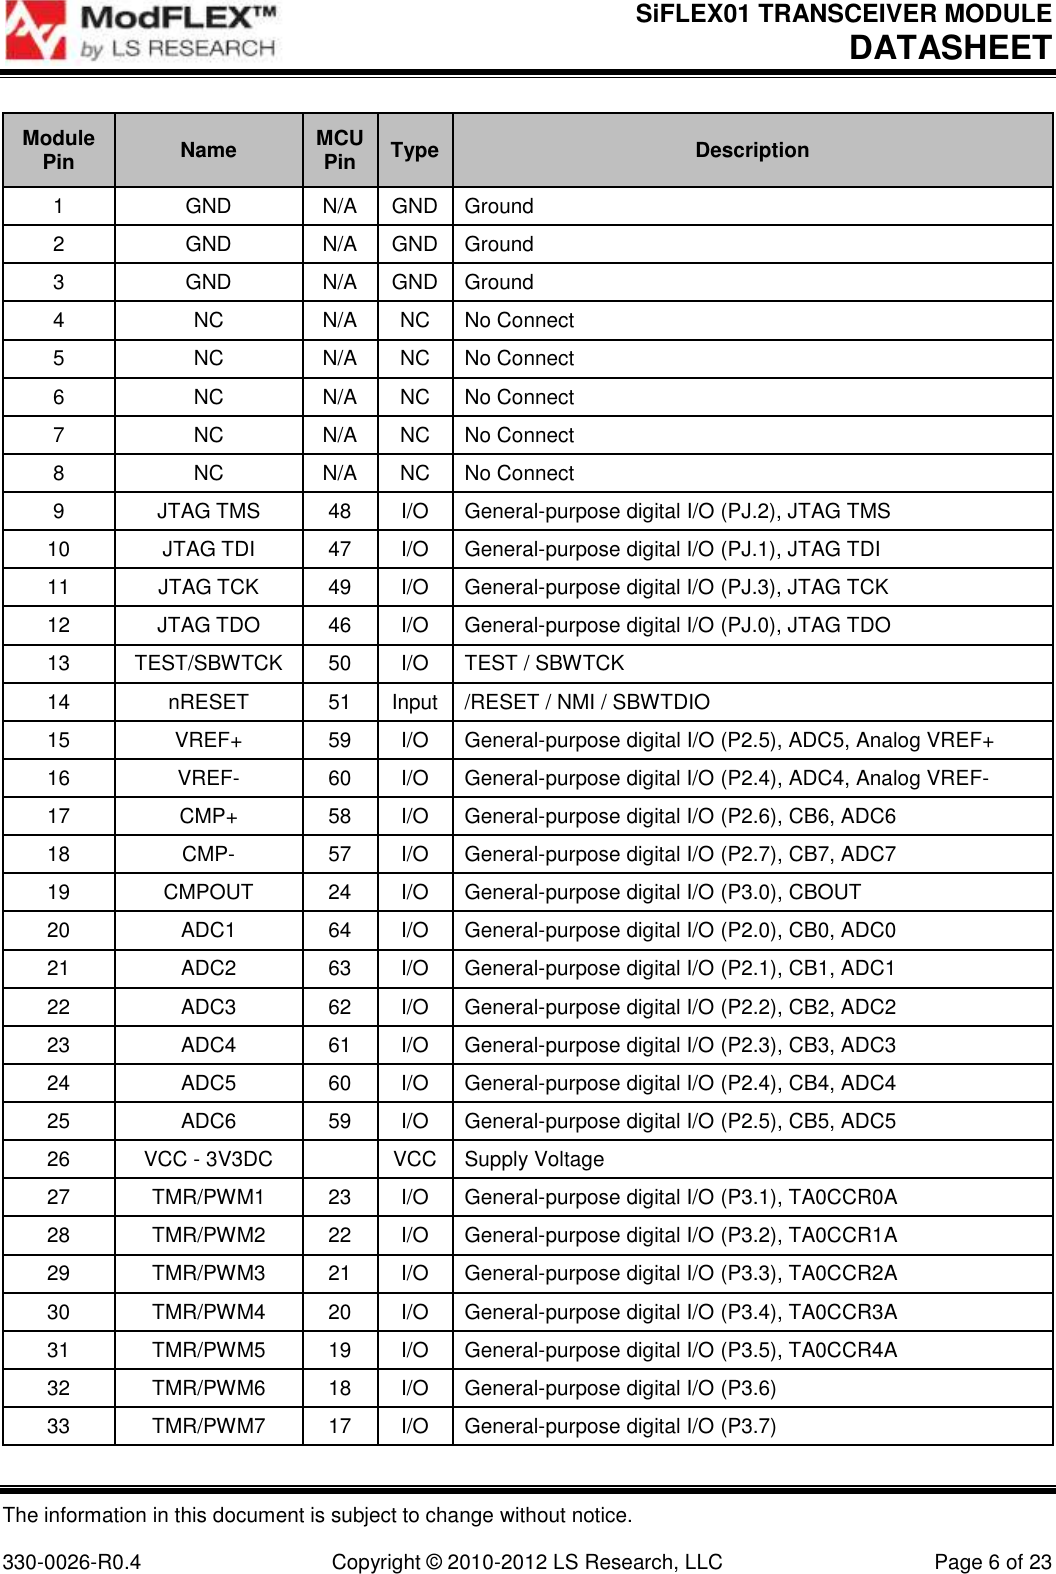 SiFLEX01 TRANSCEIVER MODULE DATASHEET The information in this document is subject to change without notice.  330-0026-R0.4  Copyright © 2010-2012 LS Research, LLC  Page 6 of 23 Module Pin Name MCU Pin Type Description 1 GND N/A GND Ground 2 GND N/A GND Ground 3 GND N/A GND Ground 4 NC N/A NC No Connect 5 NC N/A NC No Connect 6 NC N/A NC No Connect 7 NC N/A NC No Connect 8 NC N/A NC No Connect 9 JTAG TMS 48 I/O General-purpose digital I/O (PJ.2), JTAG TMS 10 JTAG TDI 47 I/O General-purpose digital I/O (PJ.1), JTAG TDI 11 JTAG TCK 49 I/O General-purpose digital I/O (PJ.3), JTAG TCK 12 JTAG TDO 46 I/O General-purpose digital I/O (PJ.0), JTAG TDO 13 TEST/SBWTCK 50 I/O TEST / SBWTCK 14 nRESET 51 Input /RESET / NMI / SBWTDIO 15 VREF+ 59 I/O General-purpose digital I/O (P2.5), ADC5, Analog VREF+ 16 VREF- 60 I/O General-purpose digital I/O (P2.4), ADC4, Analog VREF- 17 CMP+ 58 I/O General-purpose digital I/O (P2.6), CB6, ADC6 18 CMP- 57 I/O General-purpose digital I/O (P2.7), CB7, ADC7 19 CMPOUT 24 I/O General-purpose digital I/O (P3.0), CBOUT 20 ADC1 64 I/O General-purpose digital I/O (P2.0), CB0, ADC0 21 ADC2 63 I/O General-purpose digital I/O (P2.1), CB1, ADC1 22 ADC3 62 I/O General-purpose digital I/O (P2.2), CB2, ADC2 23 ADC4 61 I/O General-purpose digital I/O (P2.3), CB3, ADC3 24 ADC5 60 I/O General-purpose digital I/O (P2.4), CB4, ADC4 25 ADC6 59 I/O General-purpose digital I/O (P2.5), CB5, ADC5 26 VCC - 3V3DC  VCC Supply Voltage 27 TMR/PWM1 23 I/O General-purpose digital I/O (P3.1), TA0CCR0A 28 TMR/PWM2 22 I/O General-purpose digital I/O (P3.2), TA0CCR1A 29 TMR/PWM3 21 I/O General-purpose digital I/O (P3.3), TA0CCR2A 30 TMR/PWM4 20 I/O General-purpose digital I/O (P3.4), TA0CCR3A 31 TMR/PWM5 19 I/O General-purpose digital I/O (P3.5), TA0CCR4A 32 TMR/PWM6 18 I/O General-purpose digital I/O (P3.6) 33 TMR/PWM7 17 I/O General-purpose digital I/O (P3.7) 